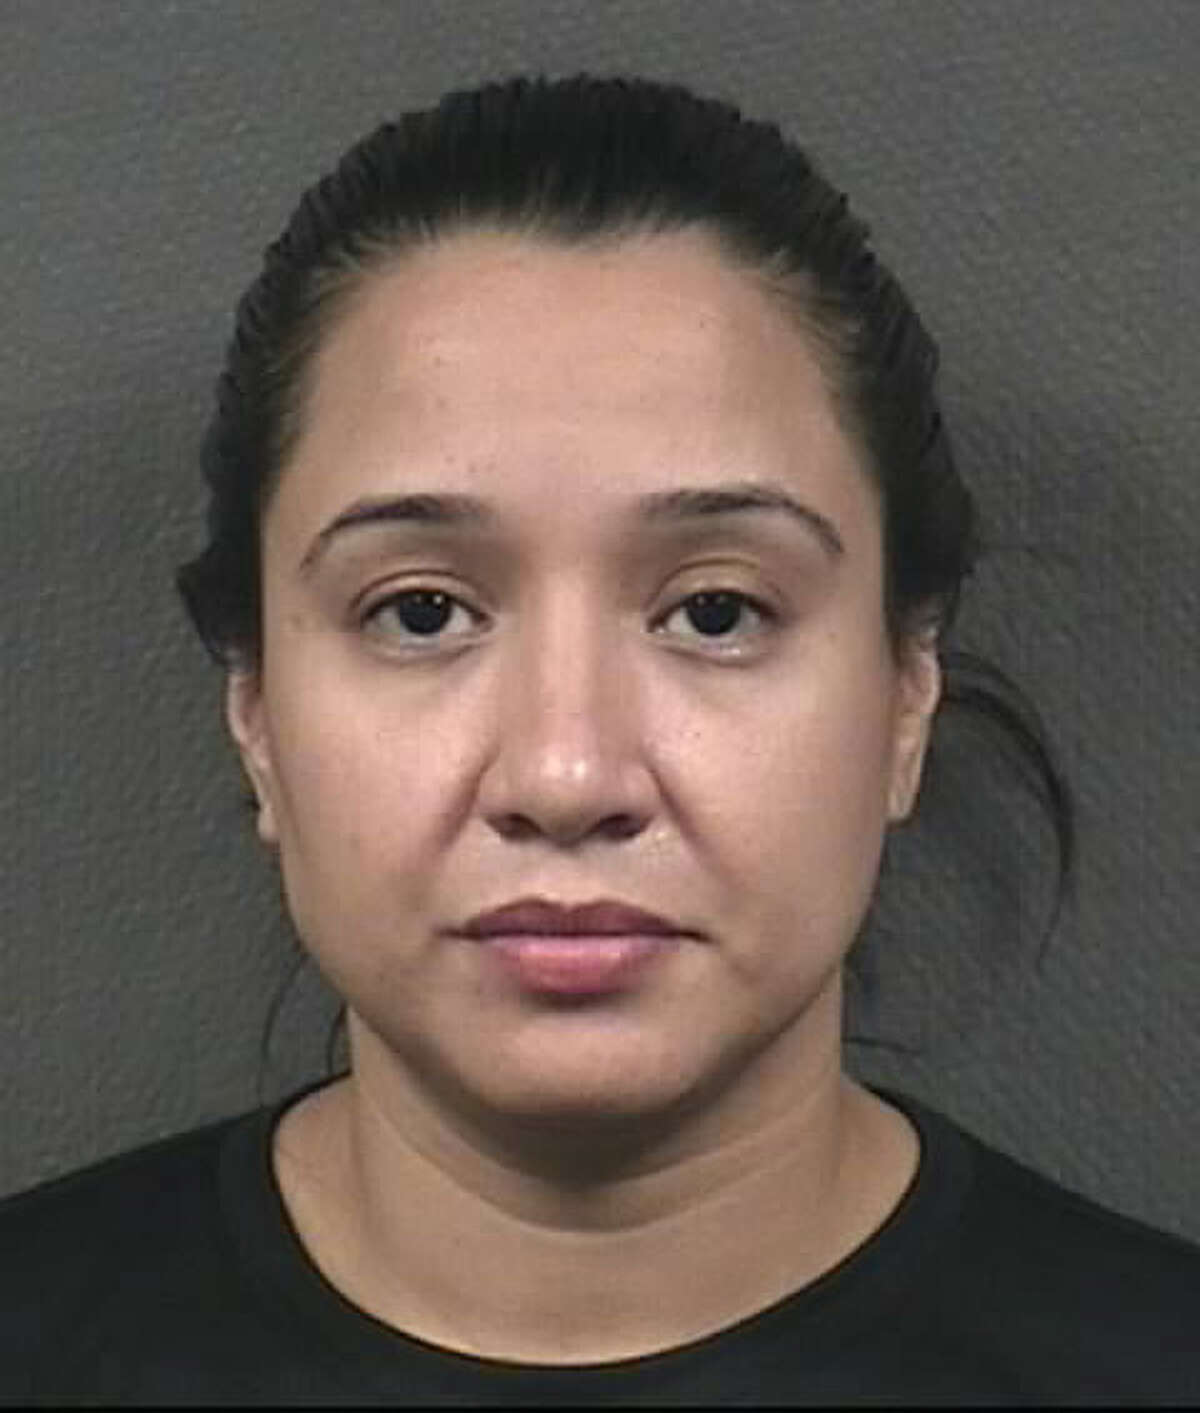 HPD officer Julissa Guzman Diaz is behind bars in the city jail. She's charged with tampering with evidence related to narcotics.